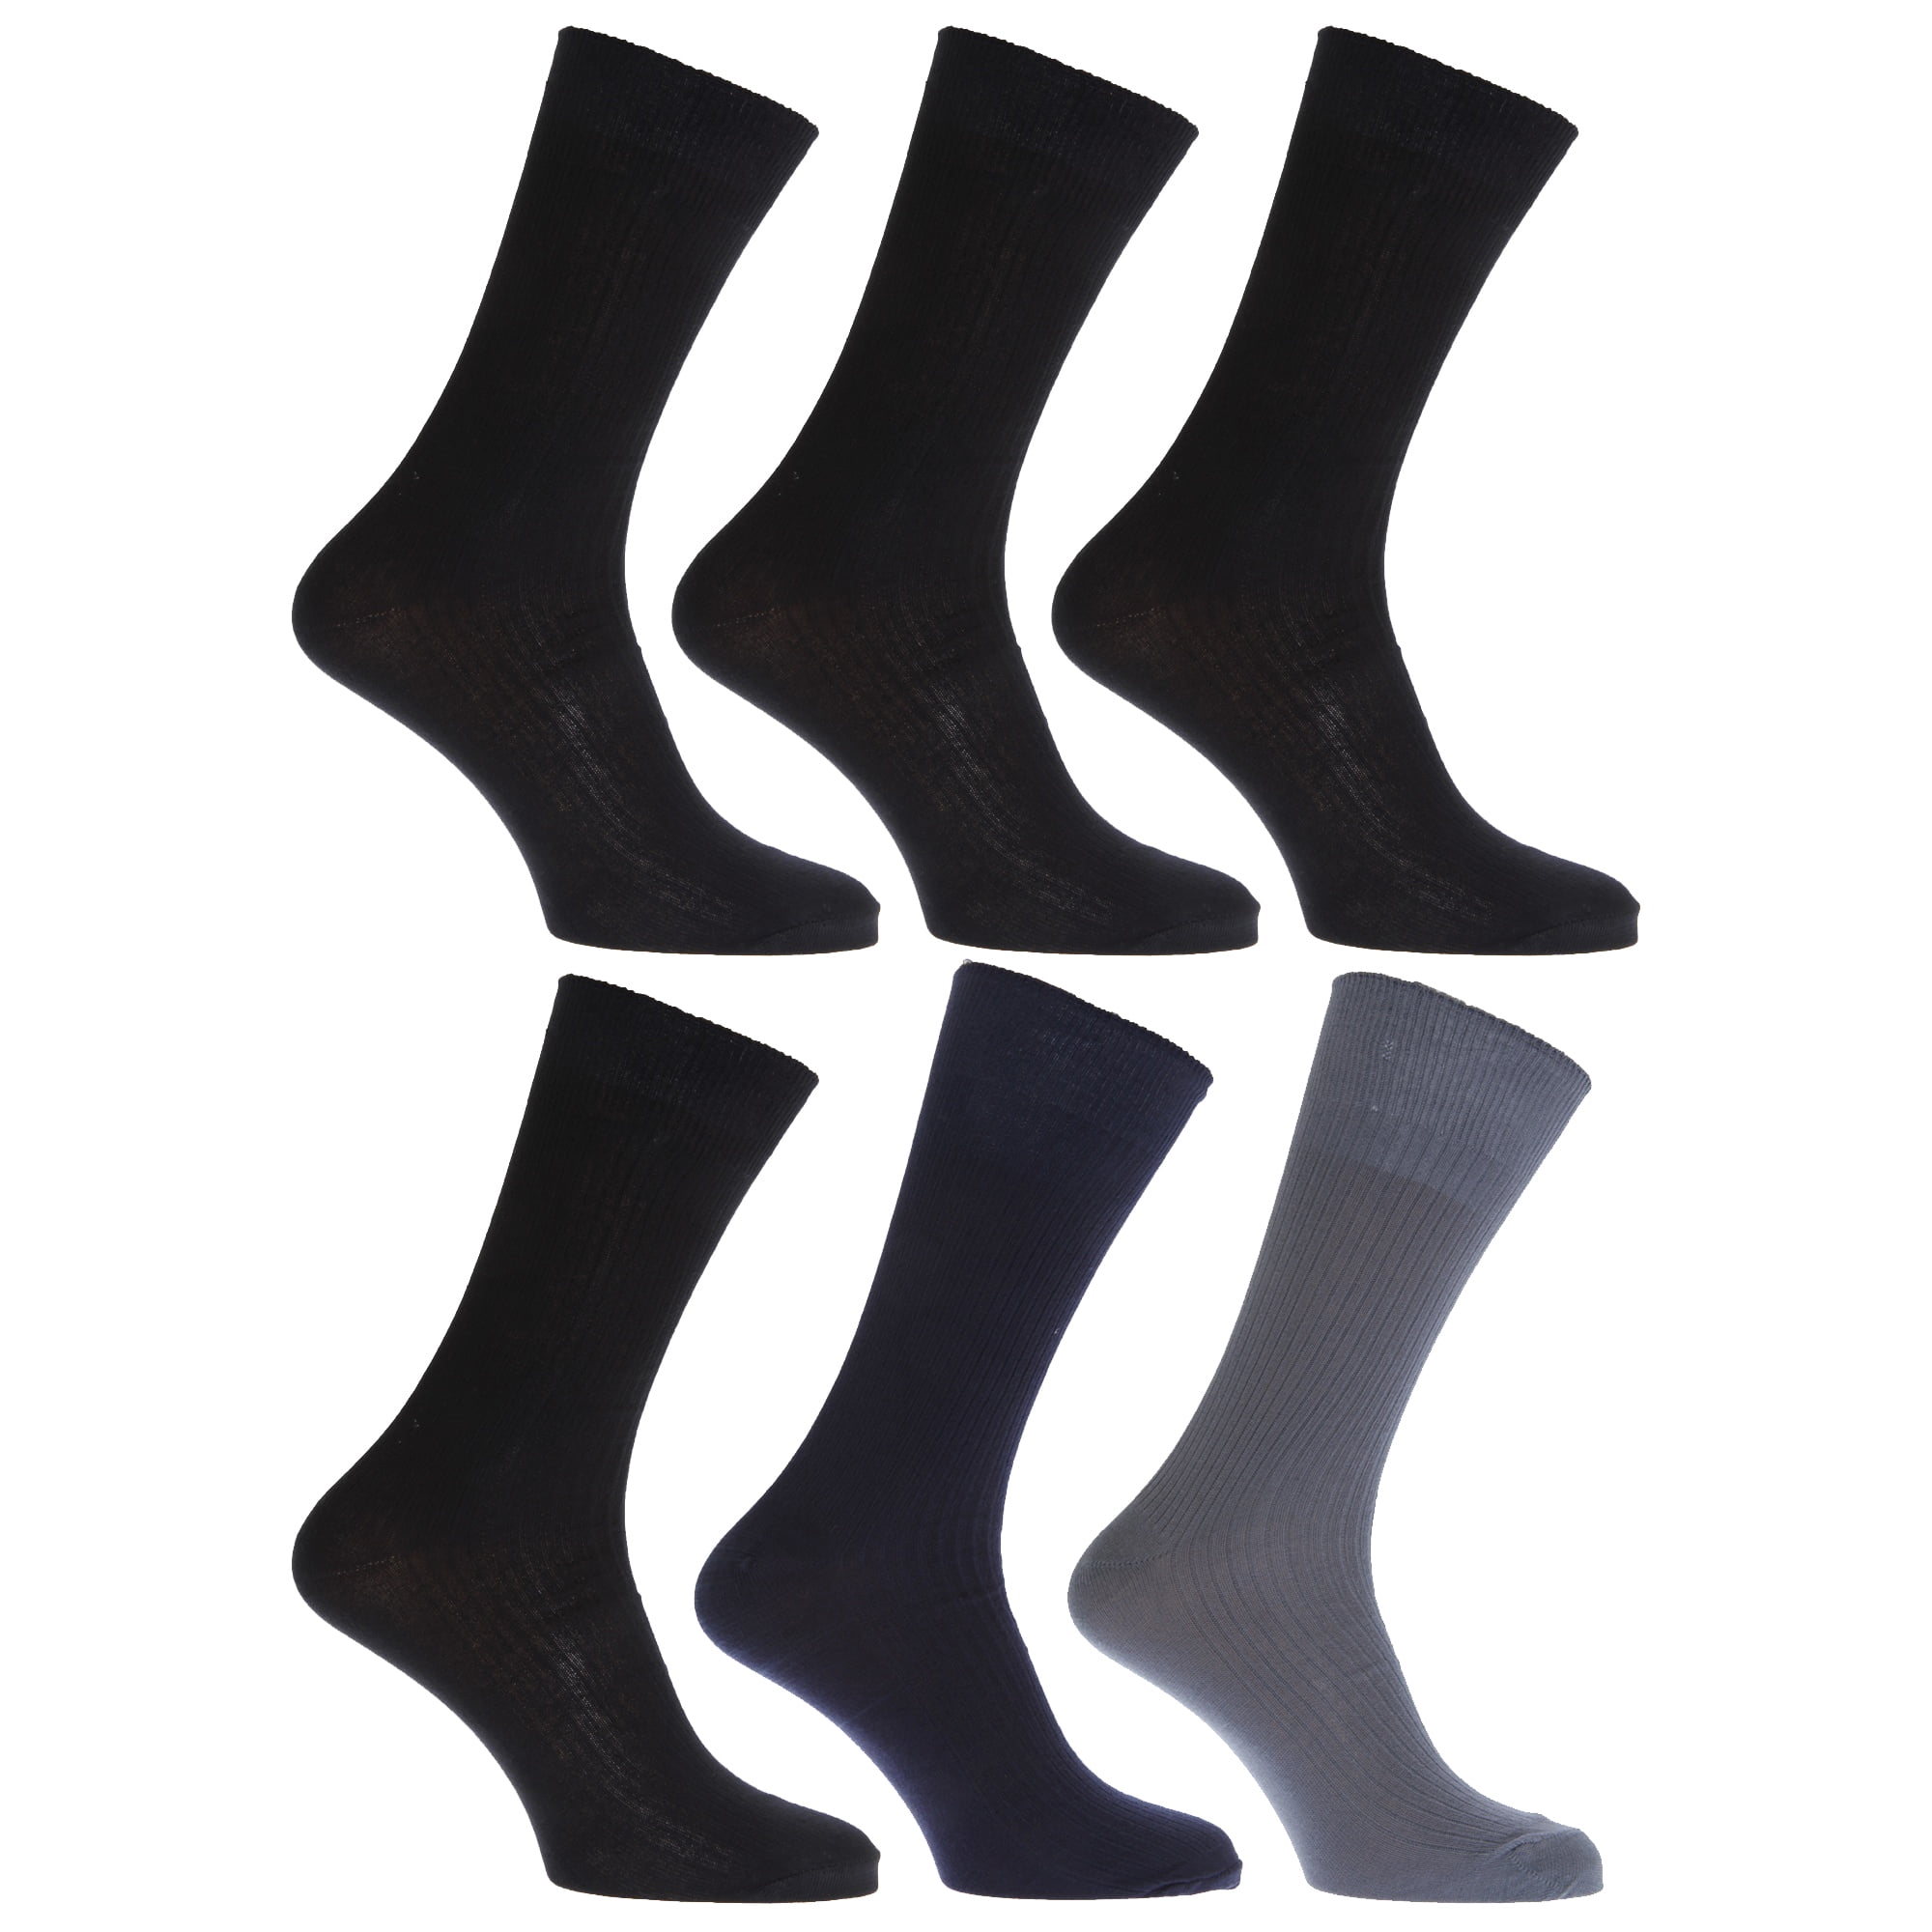 Super-Soft Multipack Option Men's Bamboo Parrot  Socks by Thought 4 Colours 